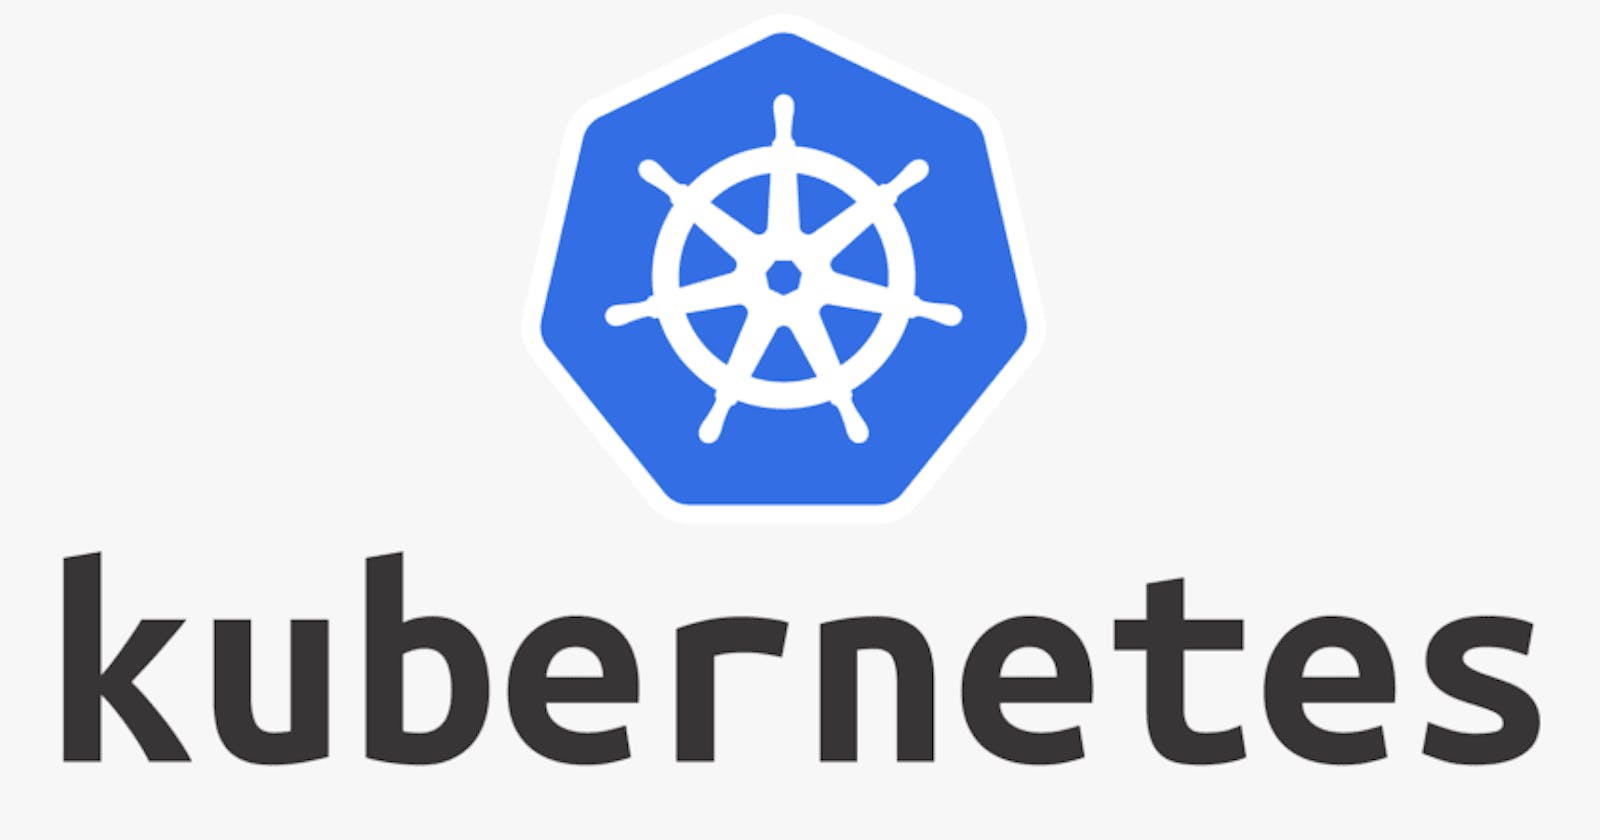 Deploy Application to Kubernetes from AWS ECR